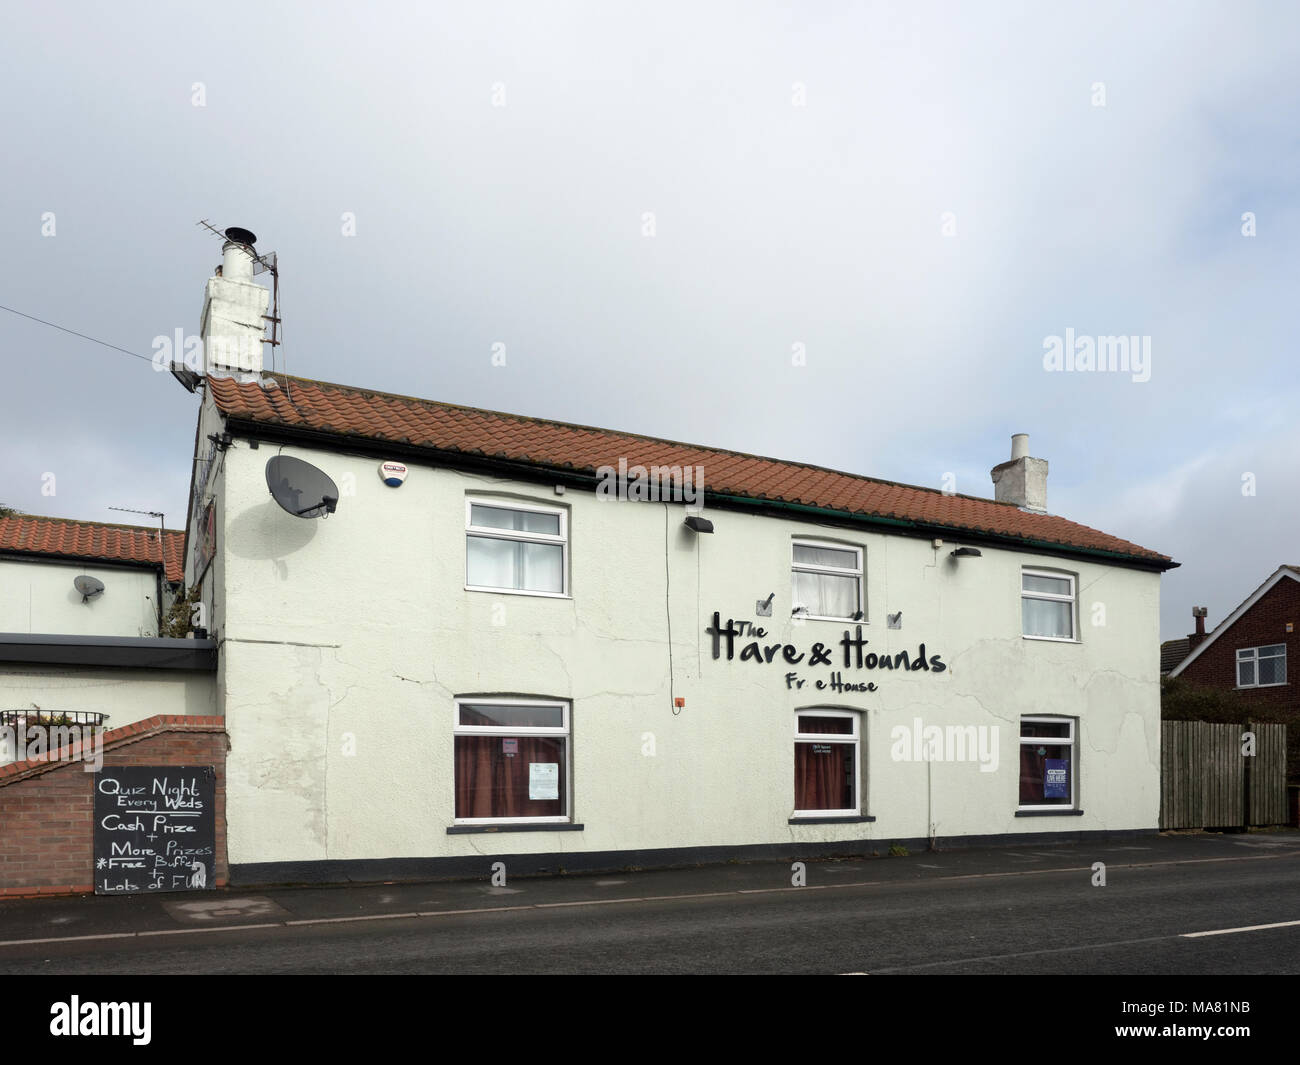 Maison publique de Hare and Hounds, High Street, Holme on Spalding Moor, East Riding of Yorkshire, Angleterre, Royaume-Uni Banque D'Images